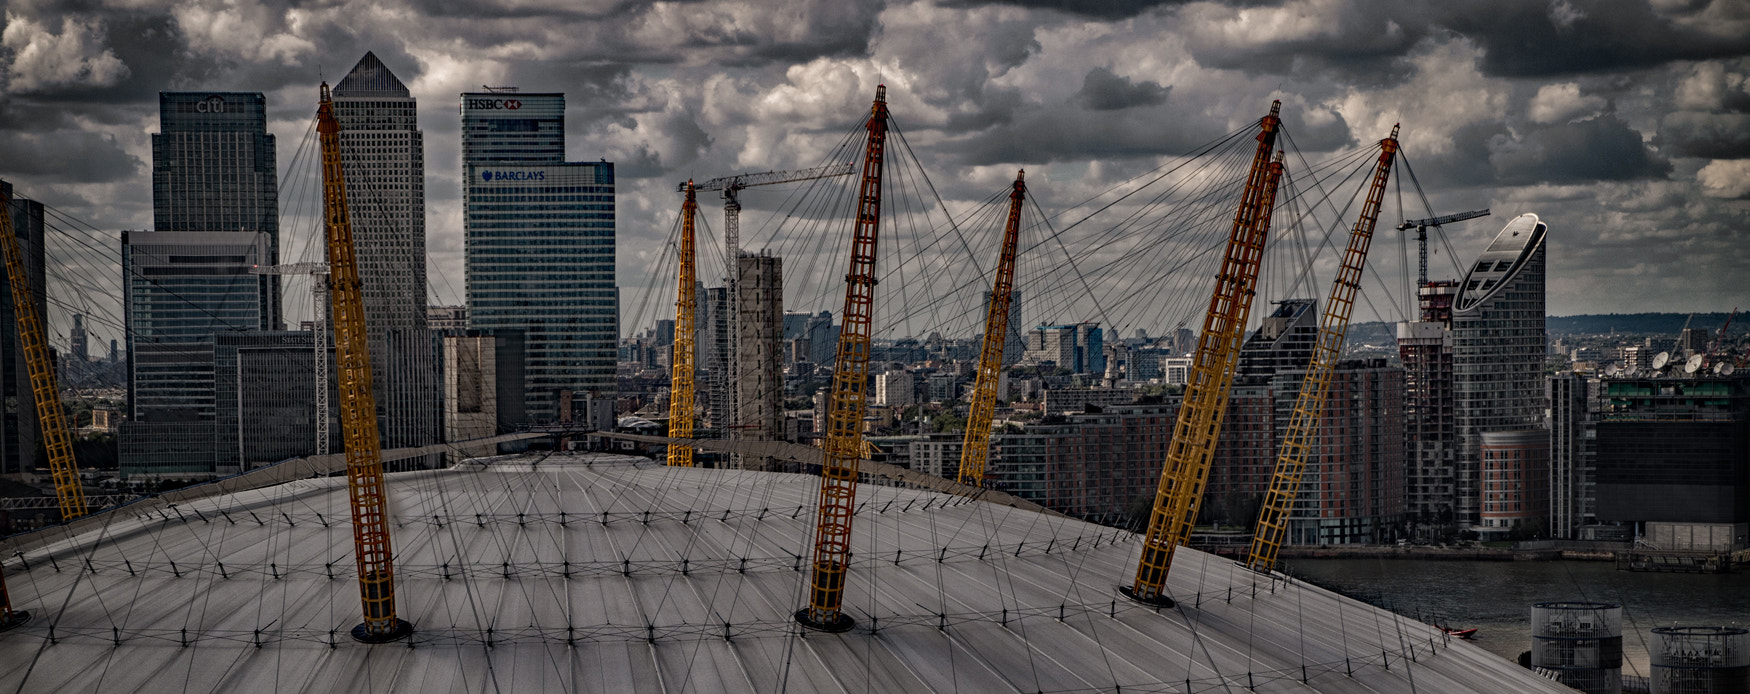 Pentax K-50 sample photo. The dome and canary wharf photography